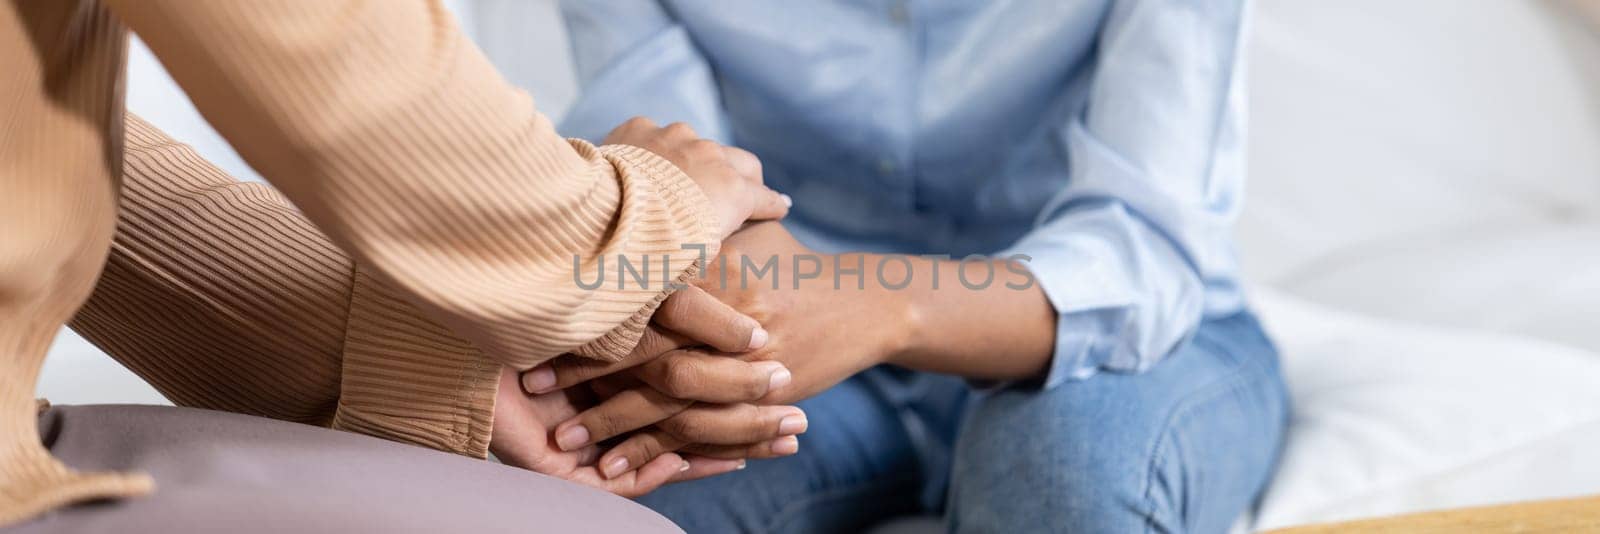 Close up shot of supportive and comforting hands for cheering up depressed patient person or stressed mind with crucial empathy